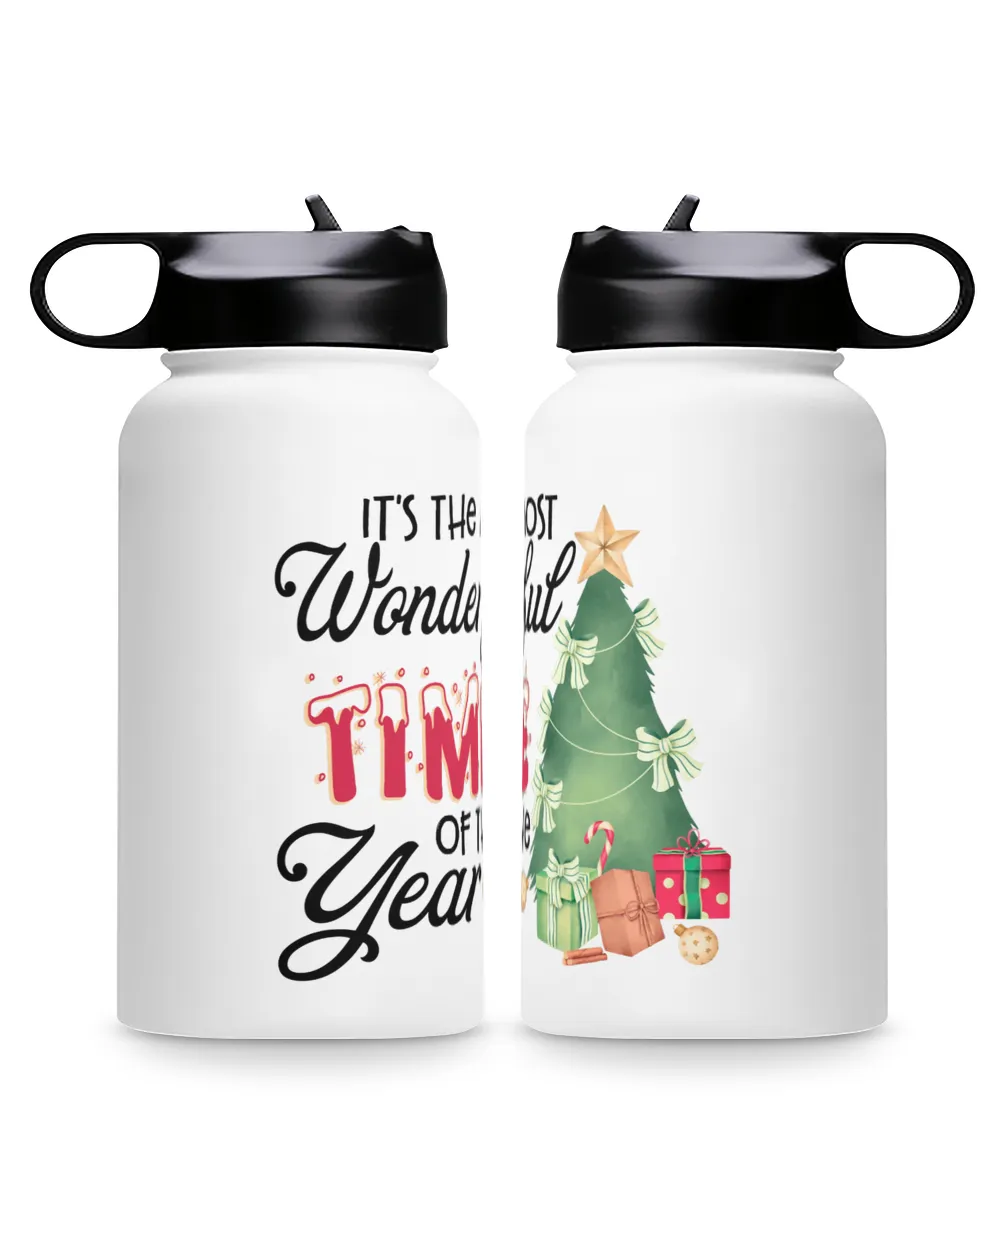 It's The Most Wonderful Time Of The Year Premium Water Bottle